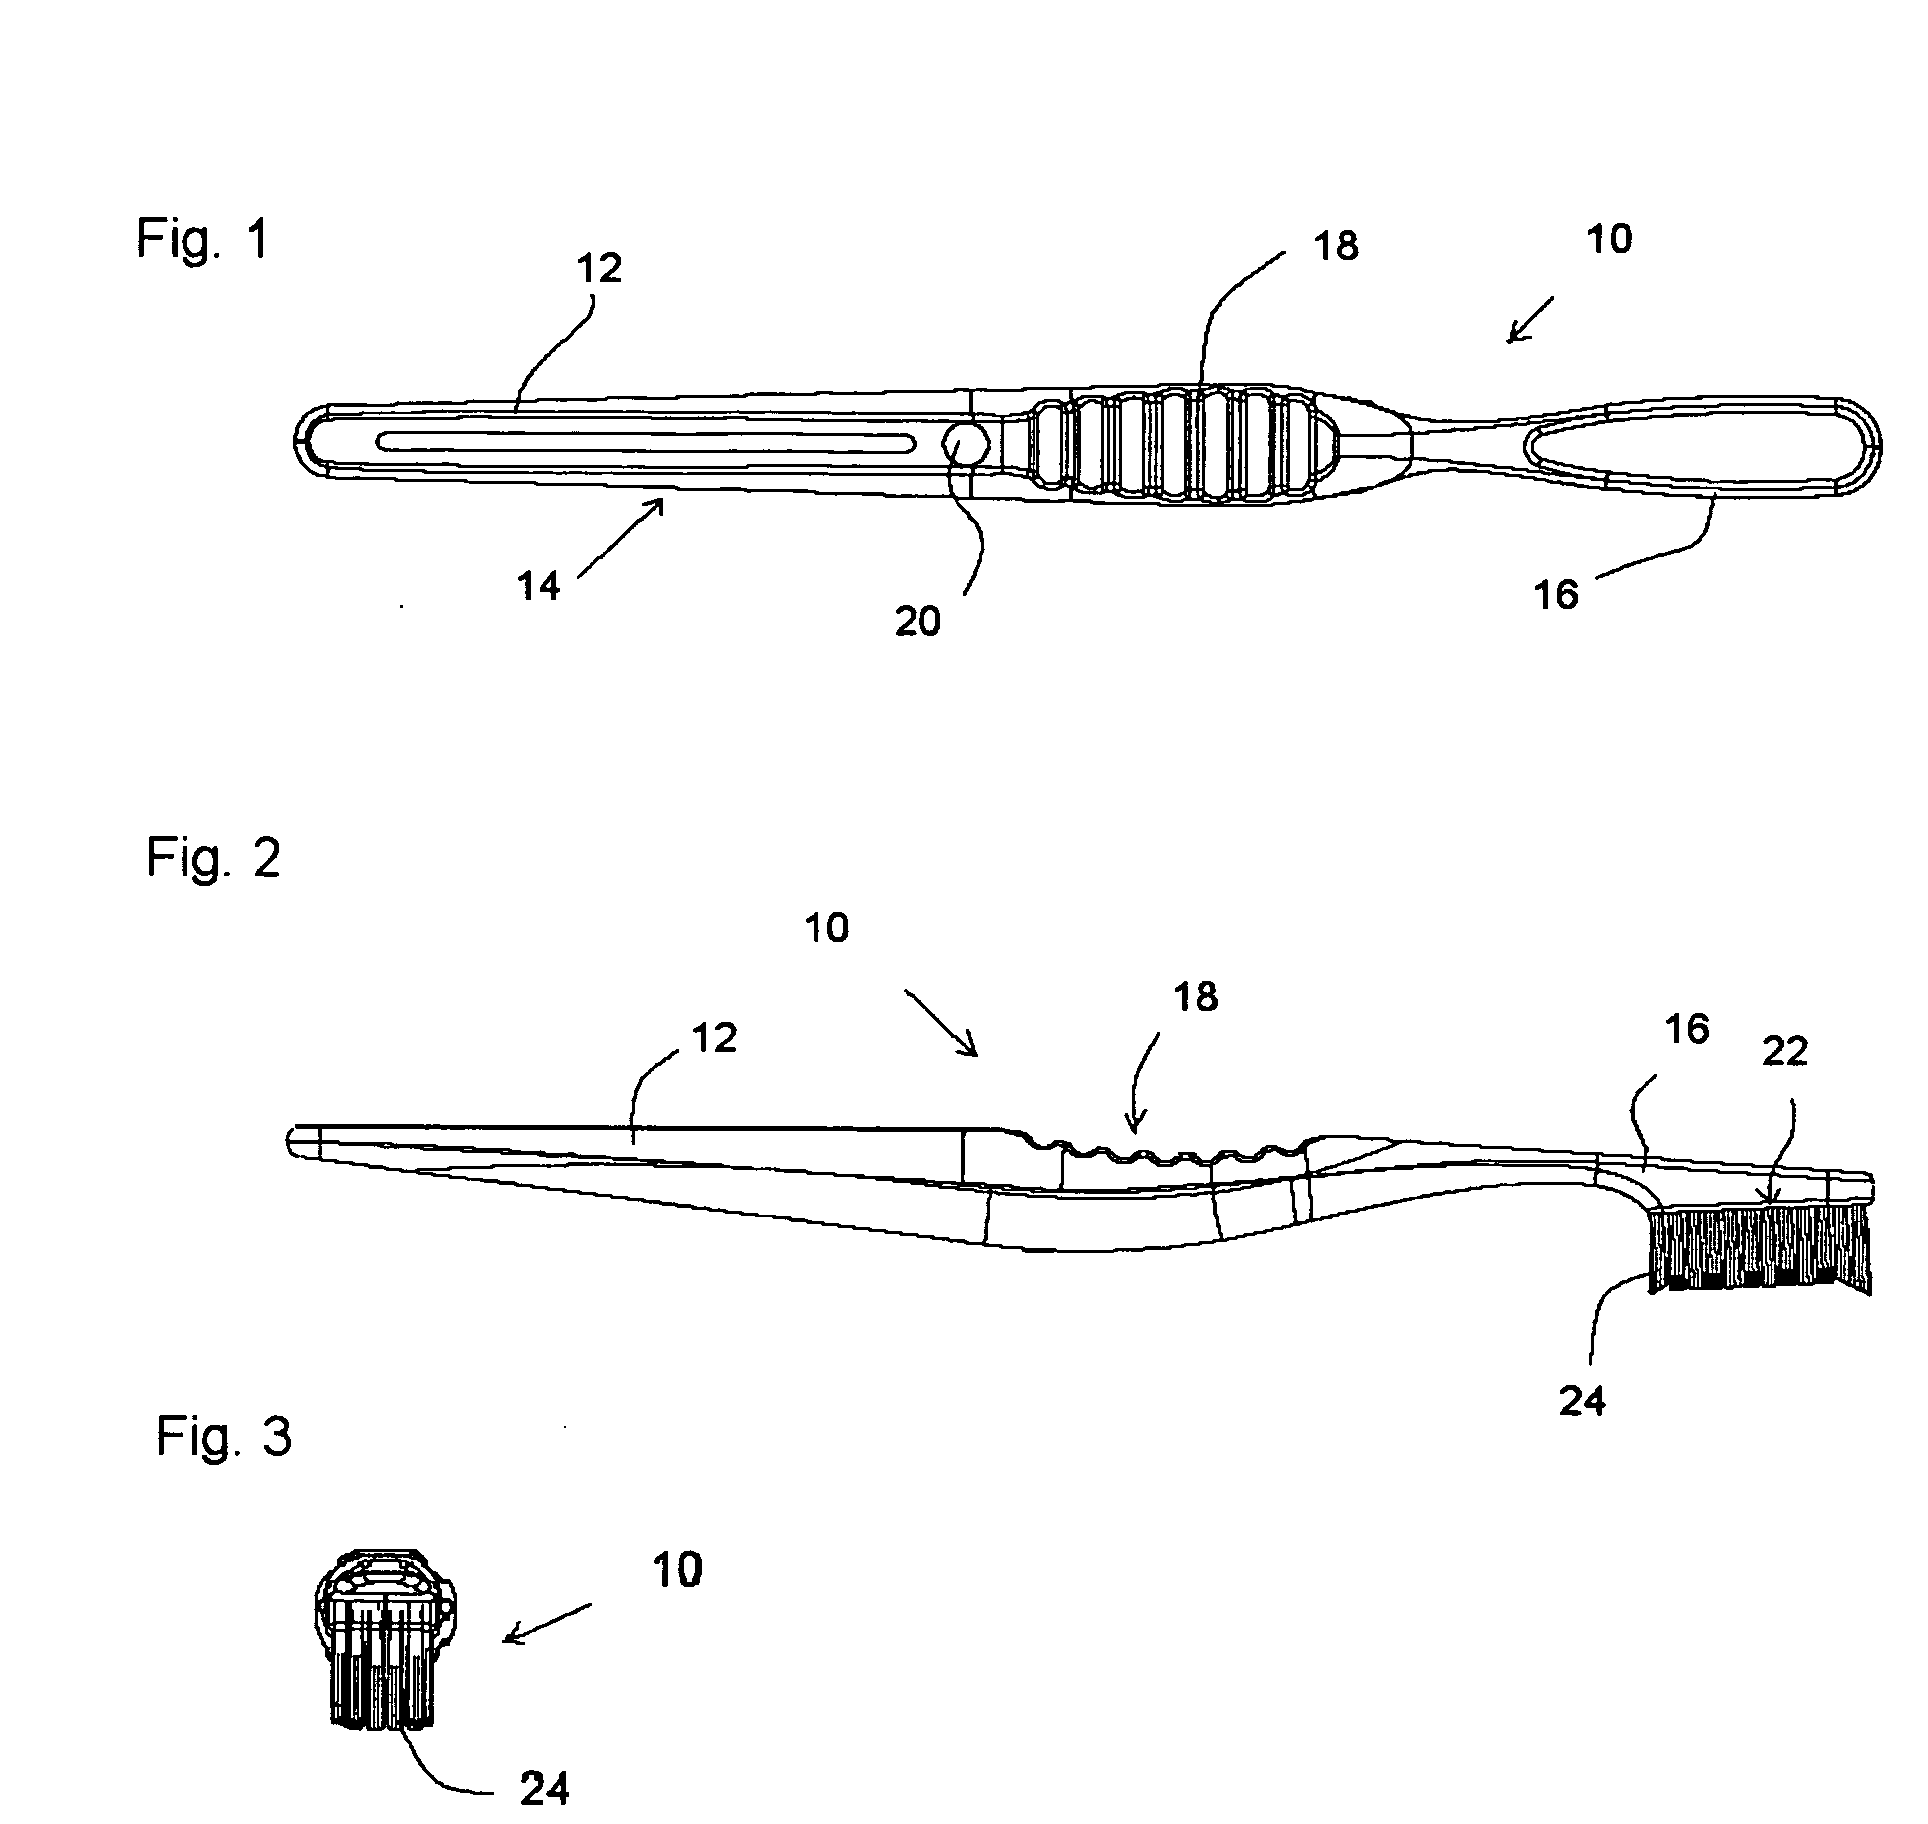 Comprehensive-hygiene toothbrush and tongue-cleaning apparatus